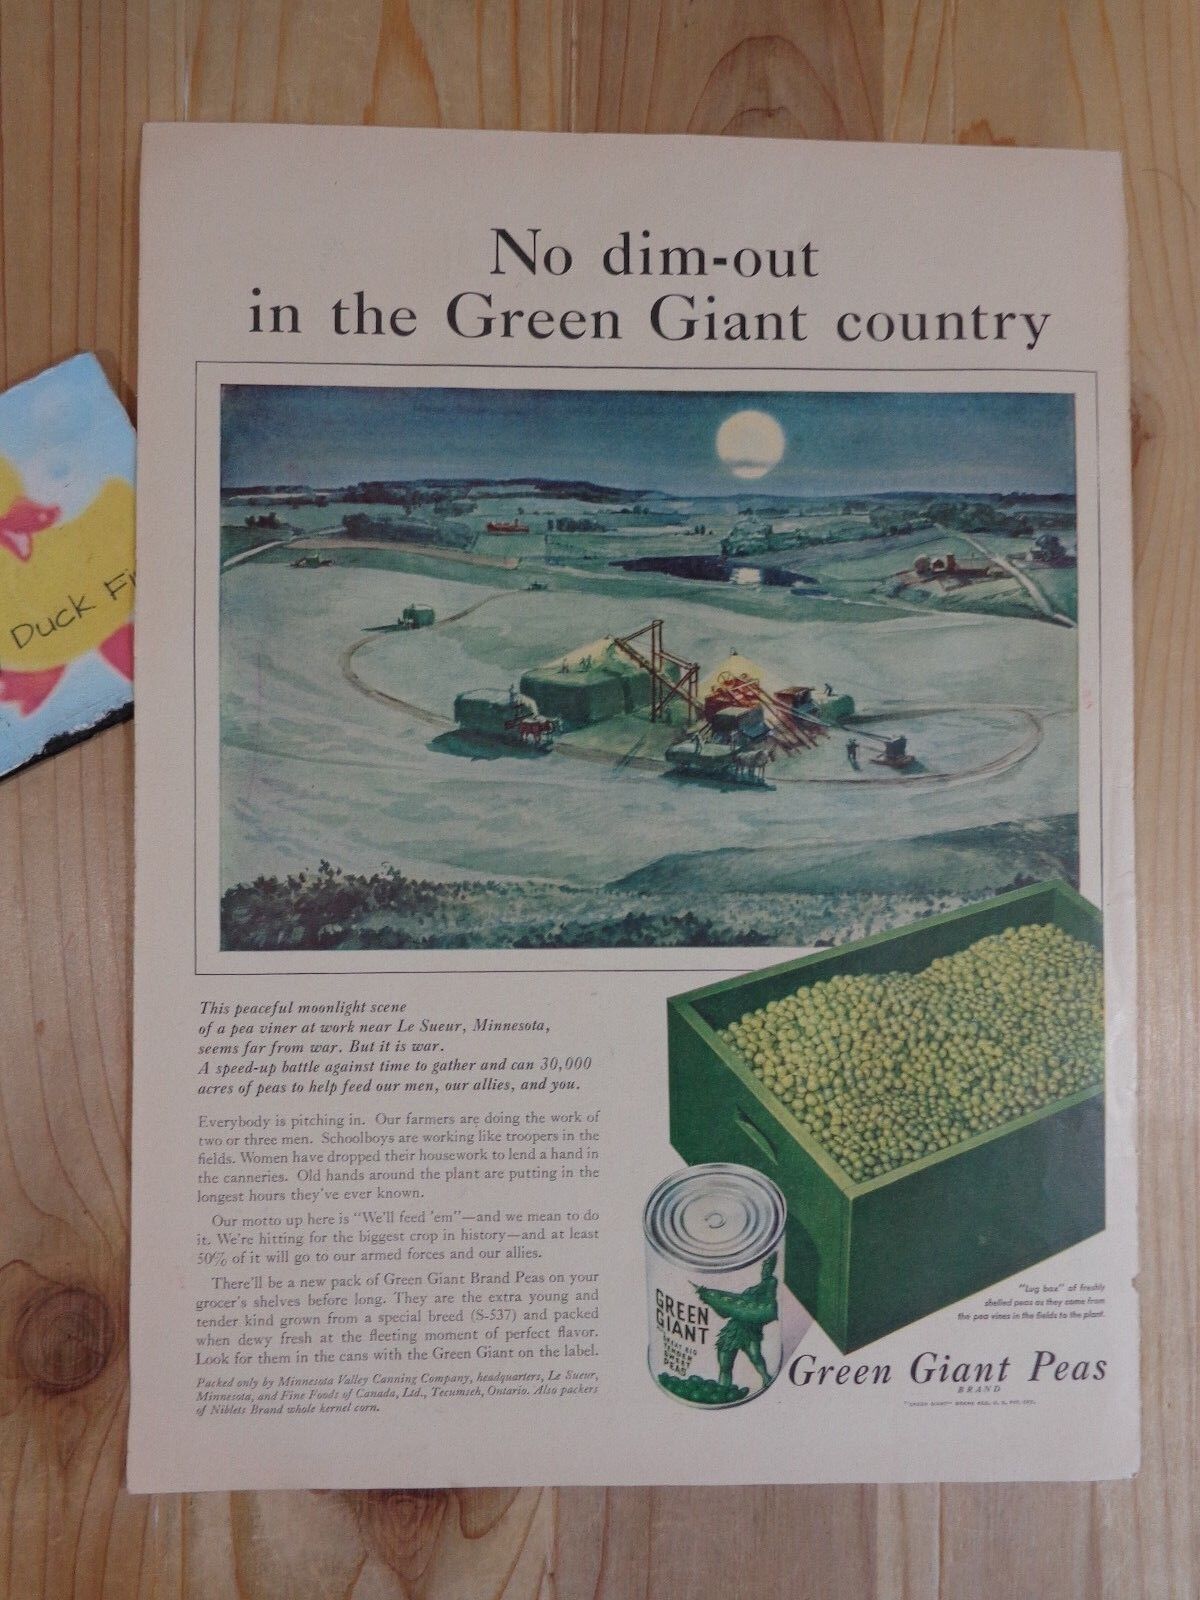  A captivating vintage advertisement likely illustrated by John C Howard, featuring a scenic green giant country.